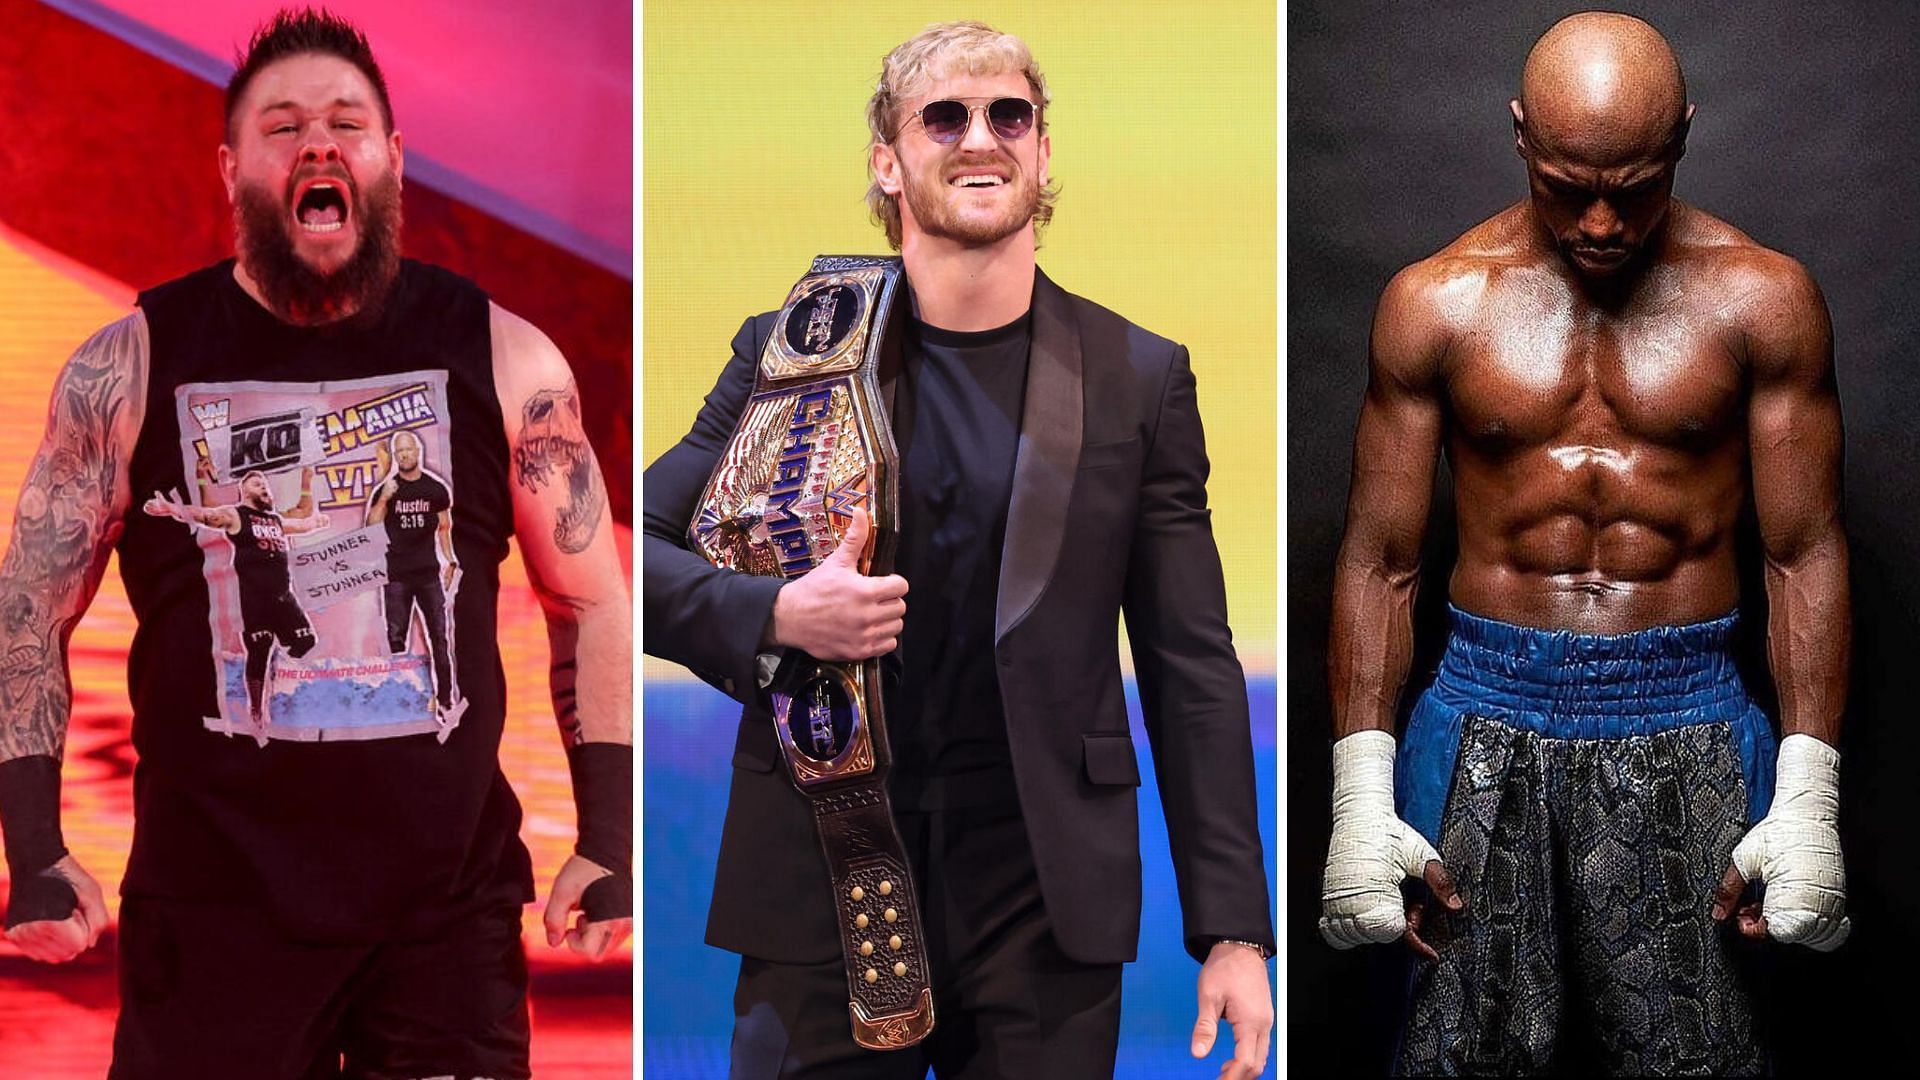 Logan Paul has faced two &quot;Prizefighters&quot; in Kevin Owens and Floyd Mayweather